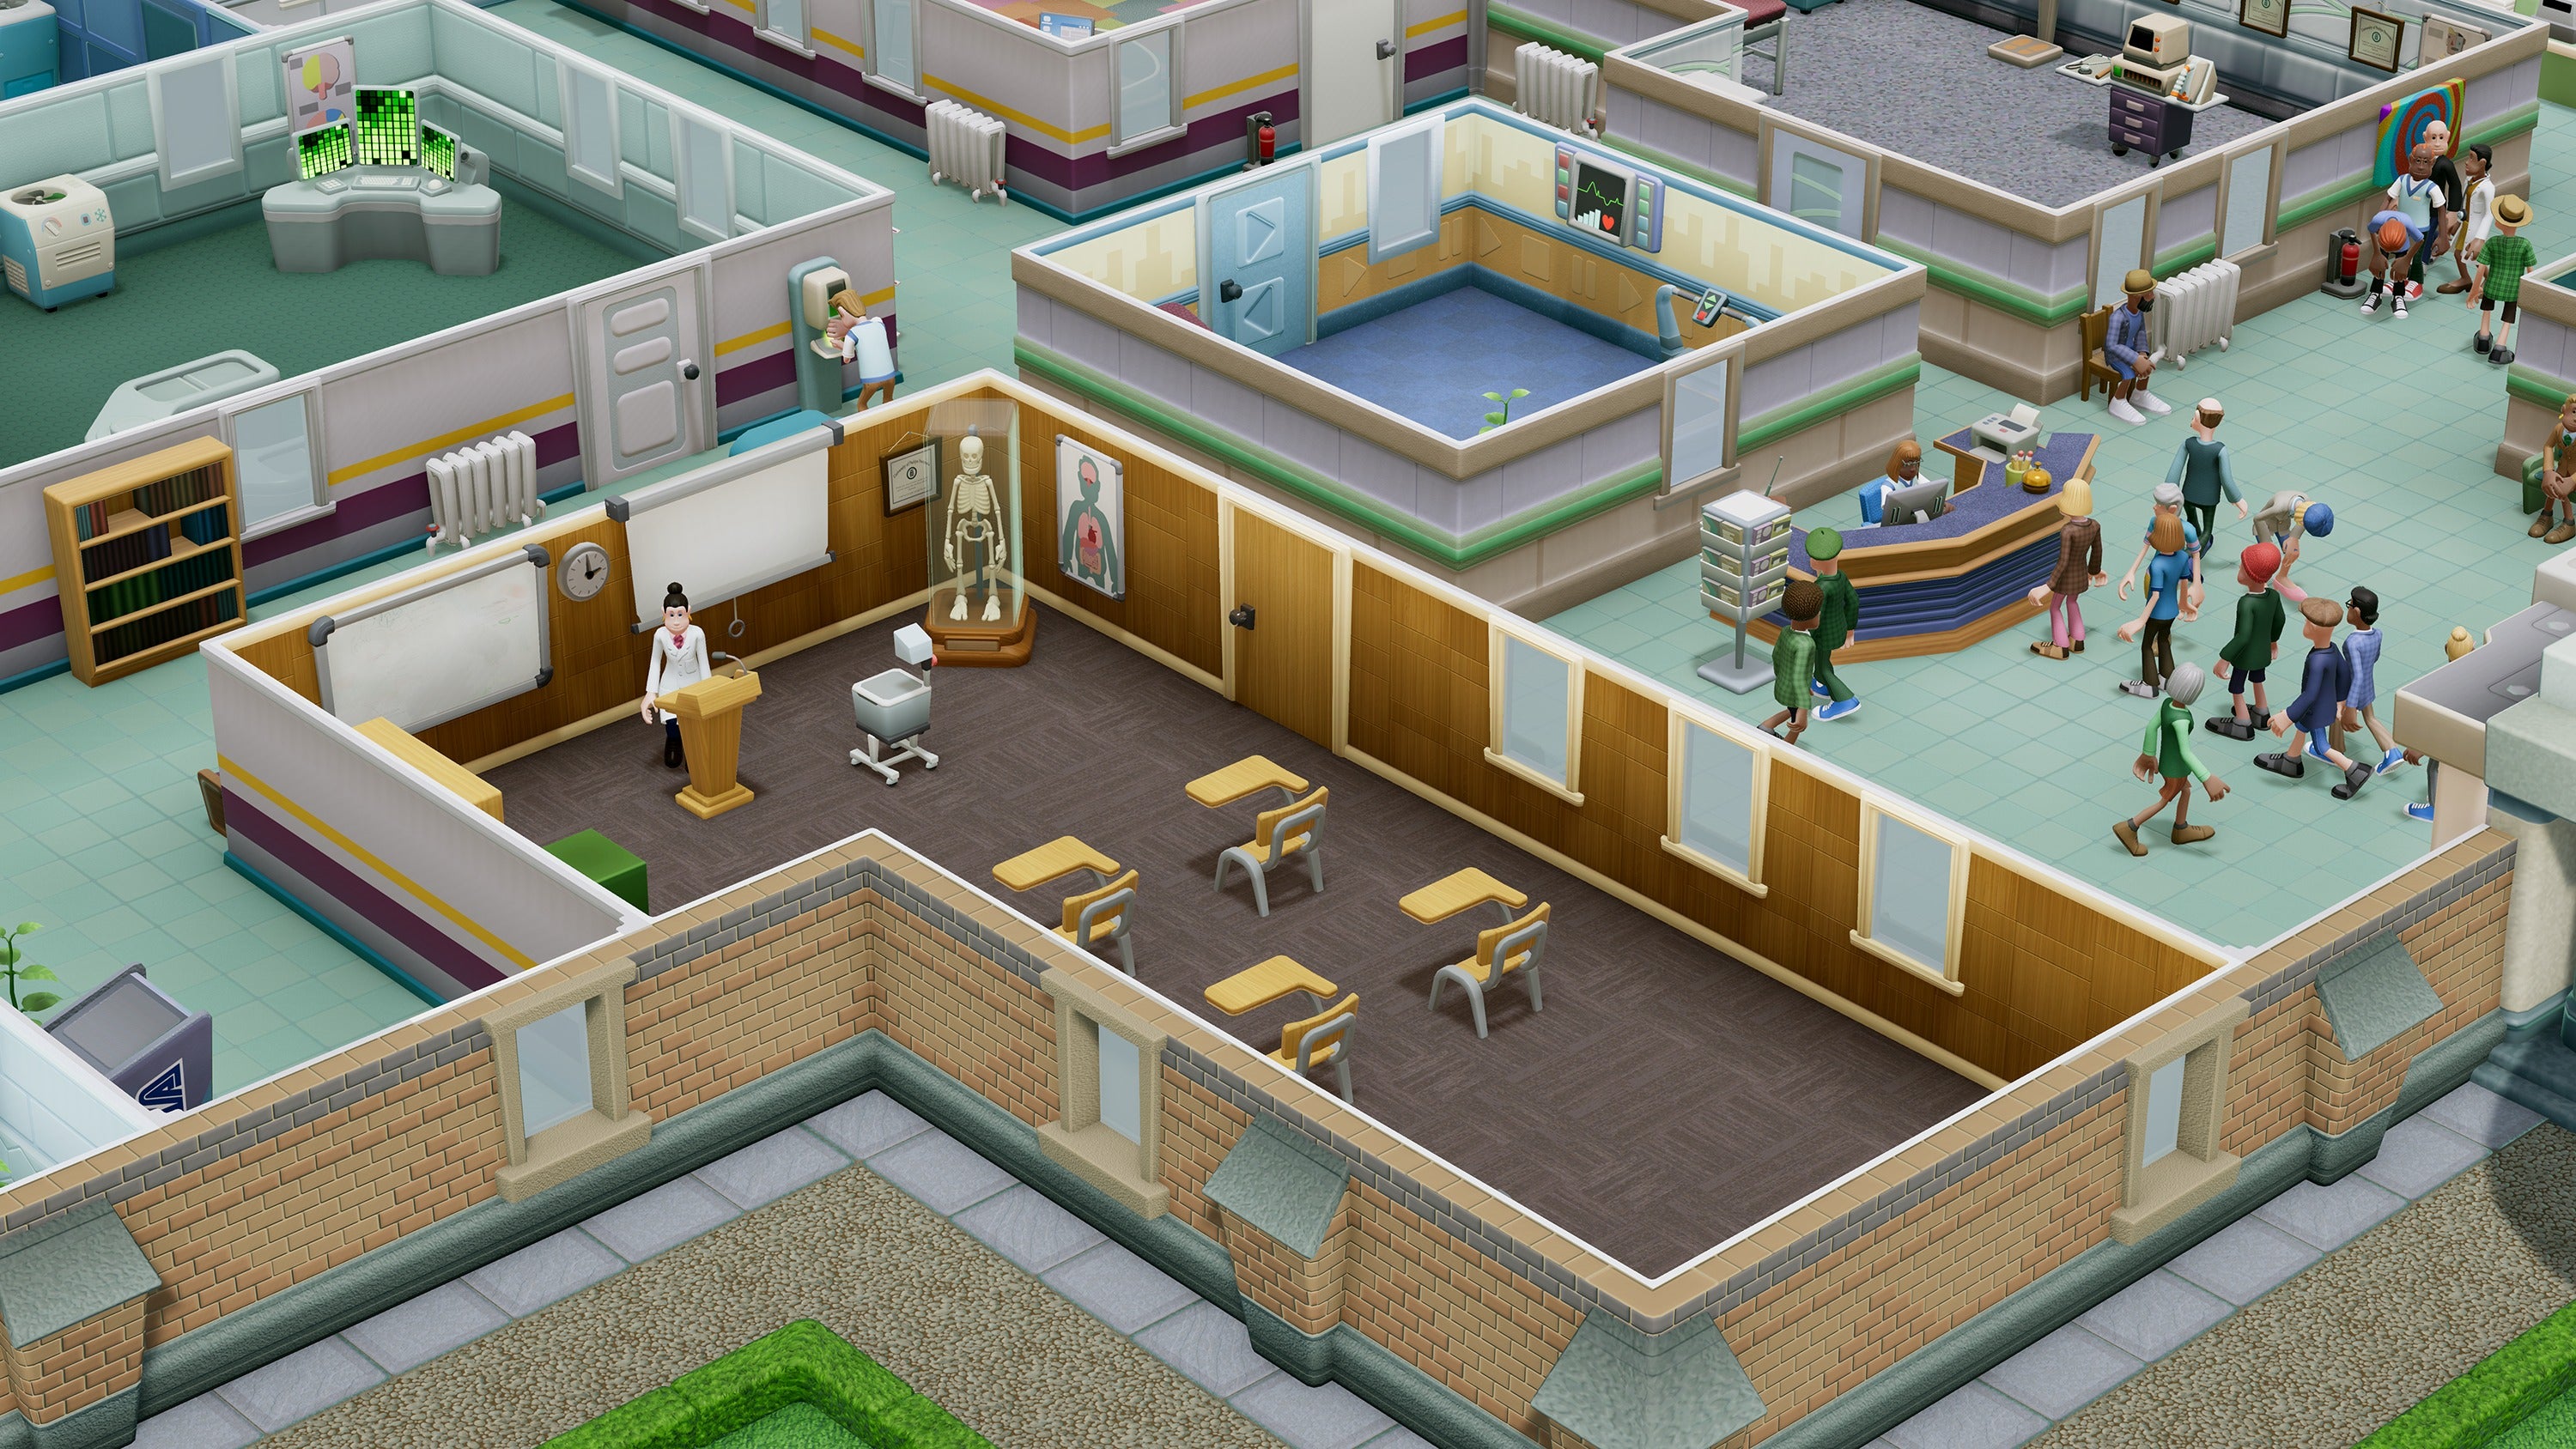 two point hospital for mac torrent